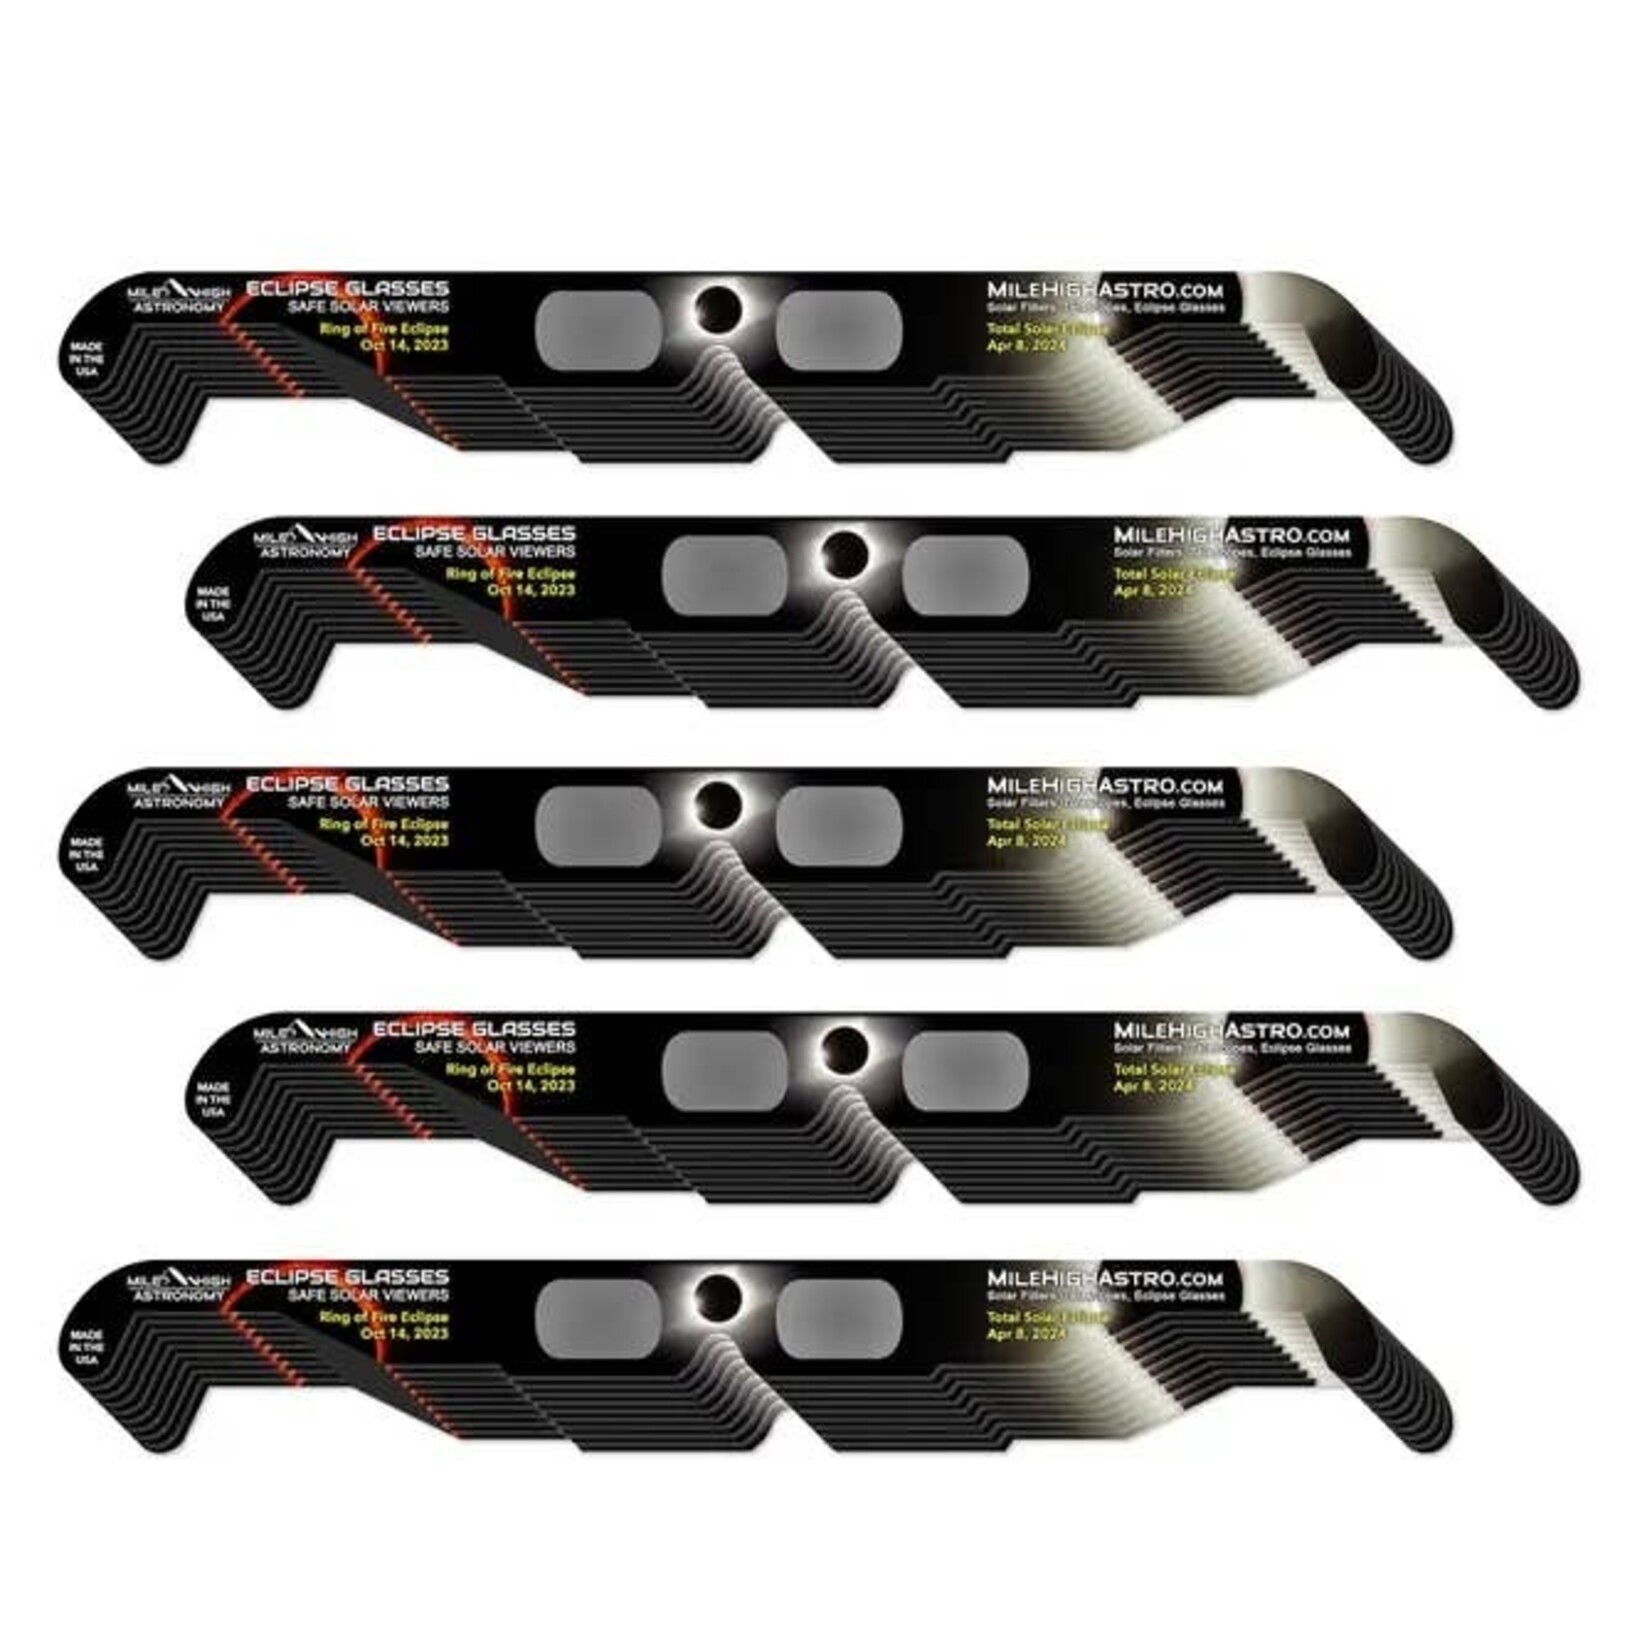 Mile High Astronomy Solar Eclipse Glasses - 10 Pack